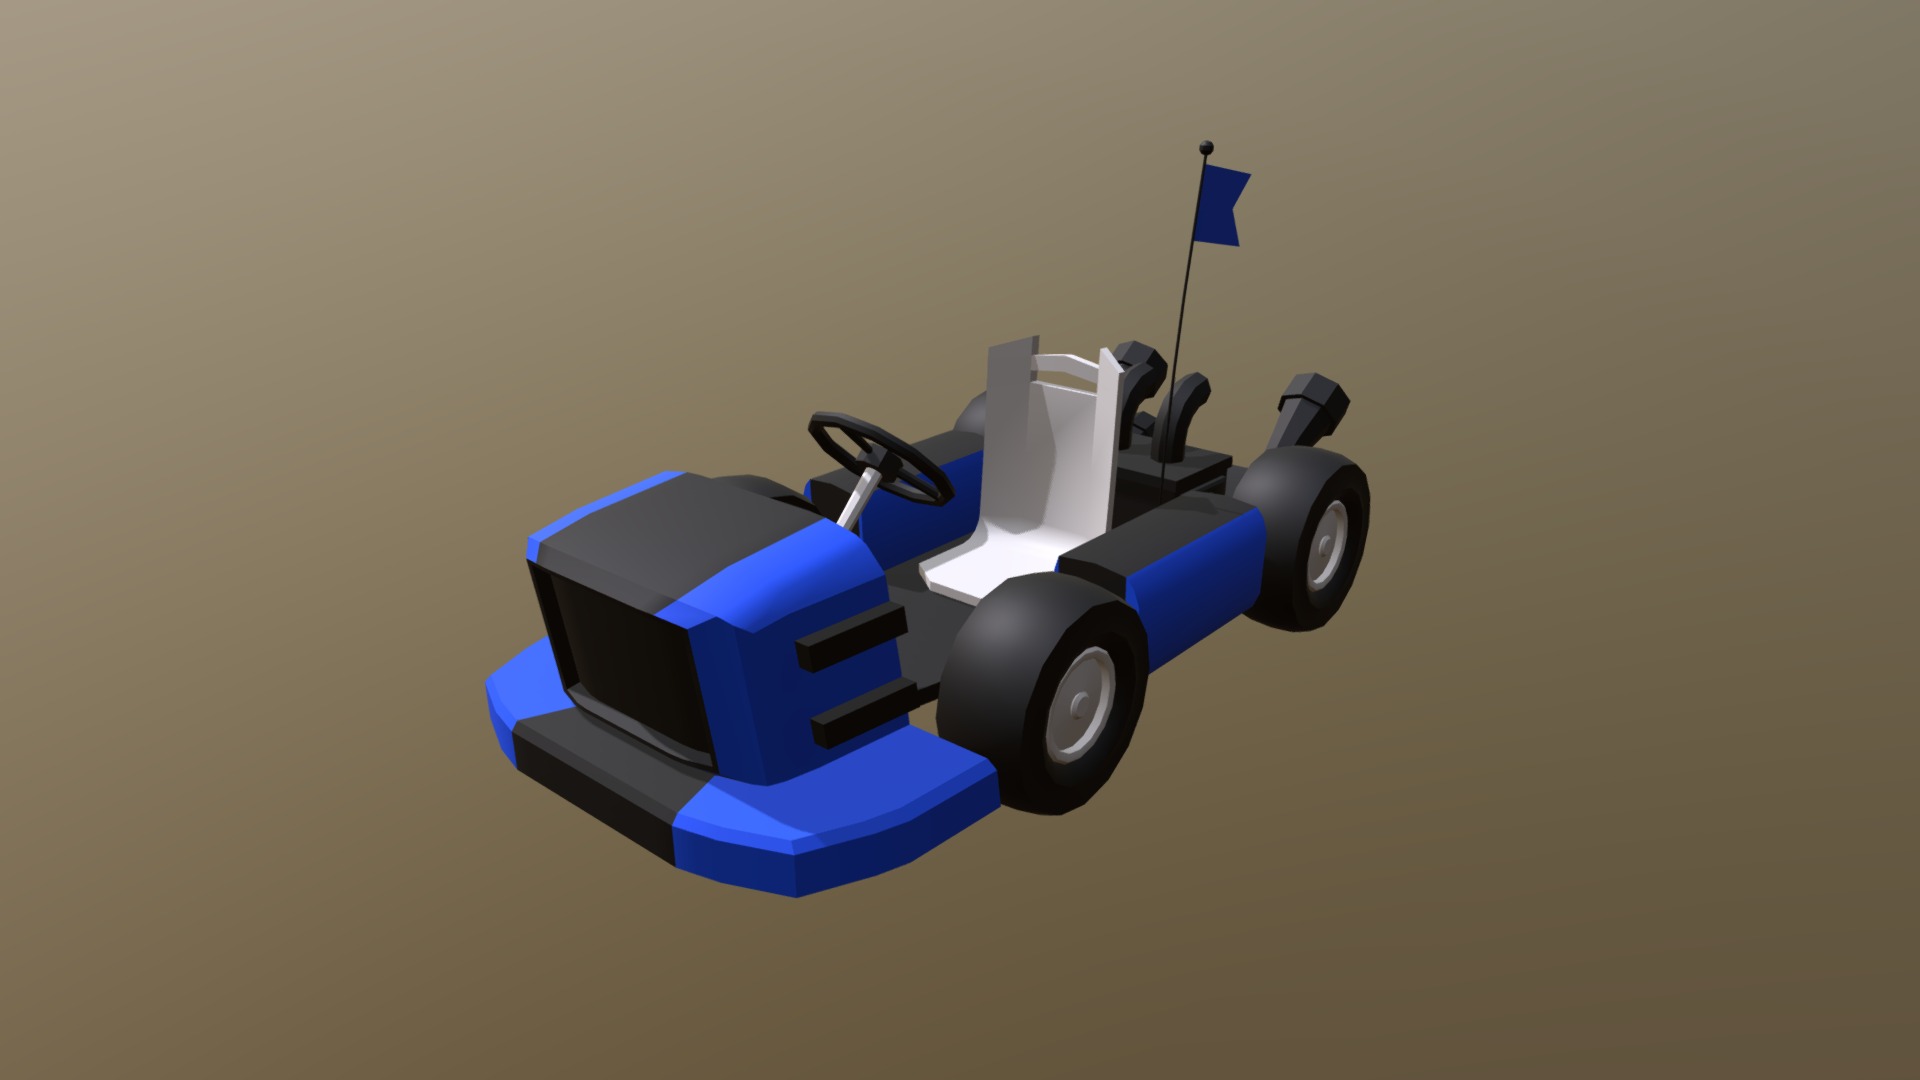 3D model Off Road Mini Kart 2 – Low Poly - This is a 3D model of the Off Road Mini Kart 2 - Low Poly. The 3D model is about a blue and black toy car.